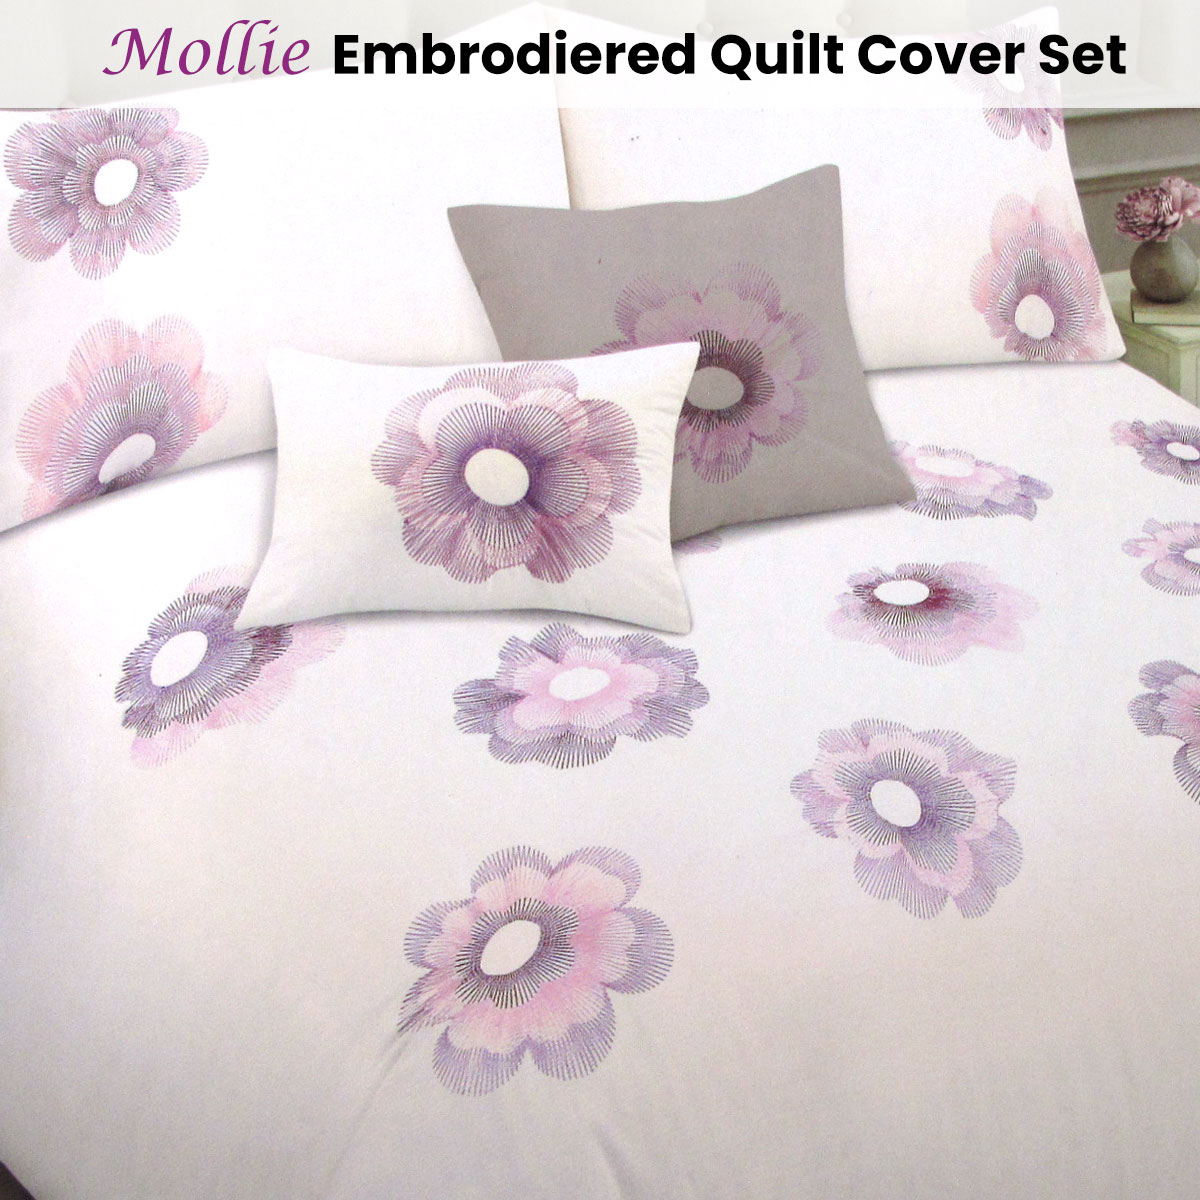 Mollie Embroidery Polyester Cotton Quilt Cover Set